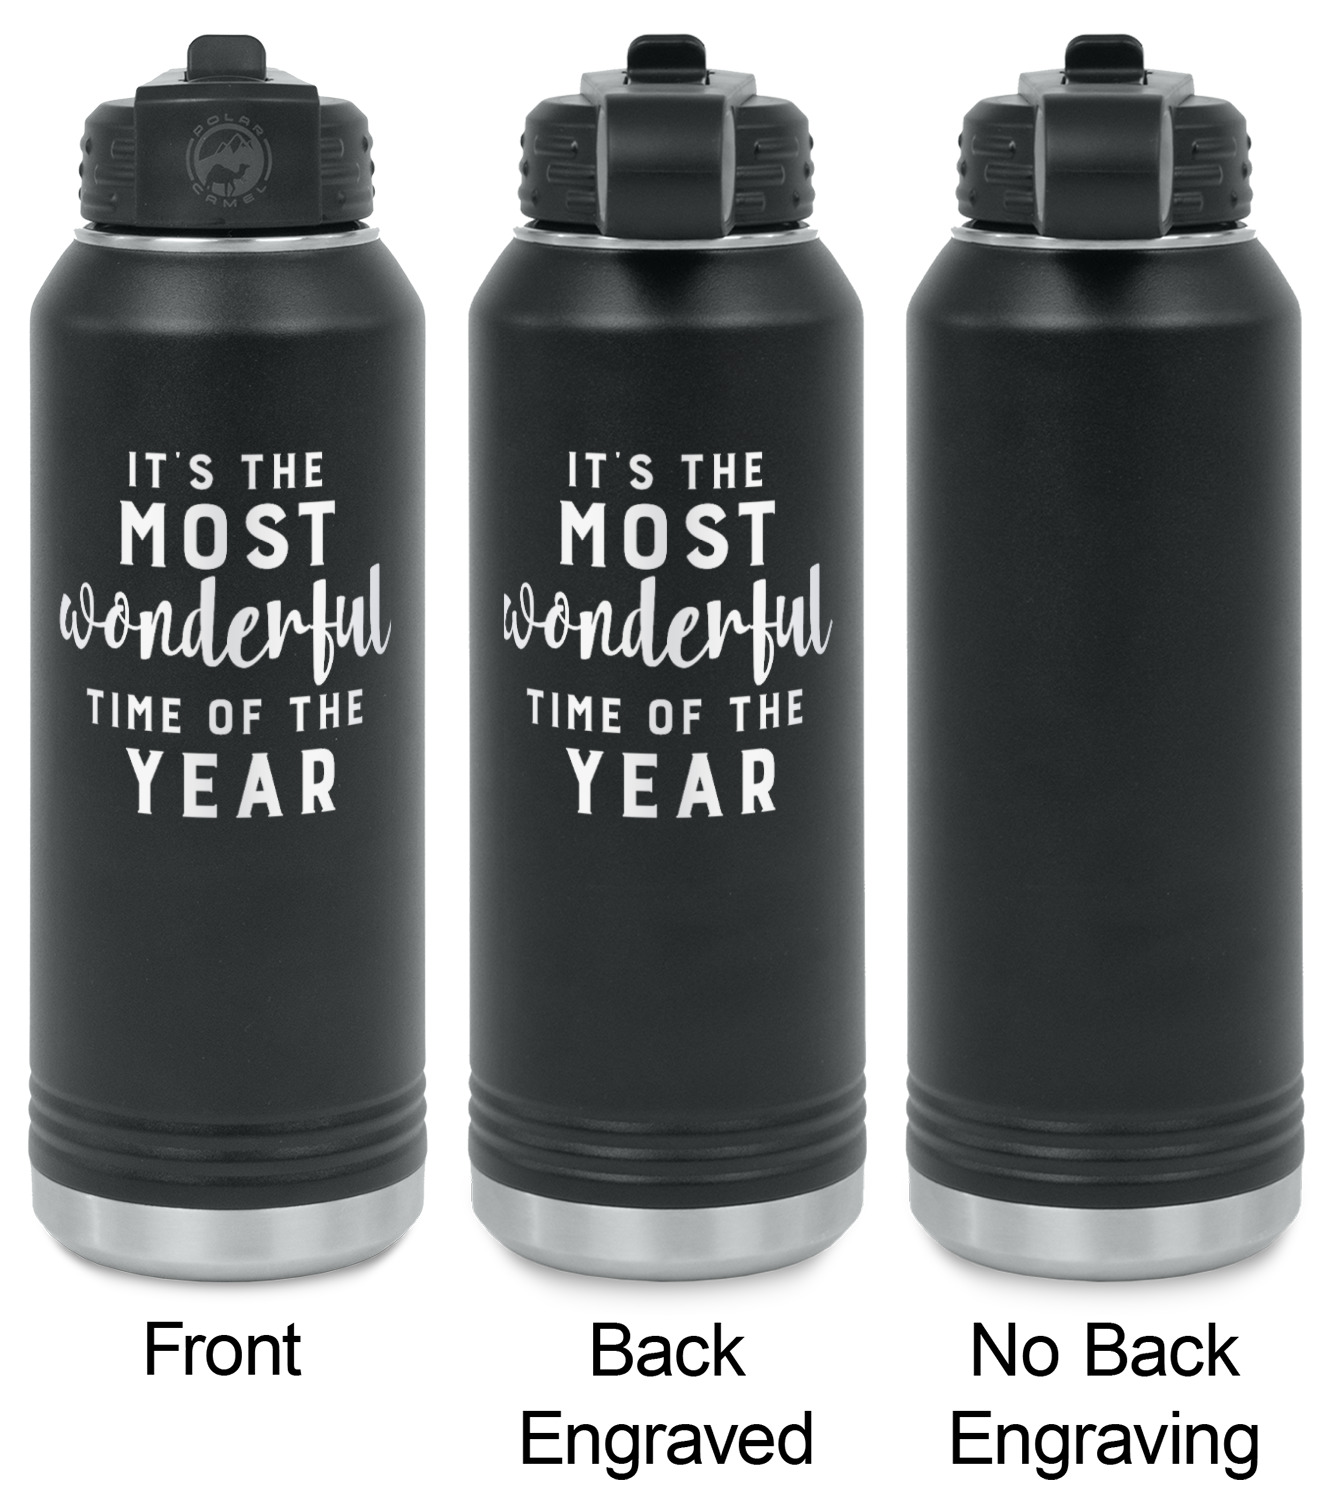 https://www.youcustomizeit.com/common/MAKE/1038049/Christmas-Quotes-and-Sayings-Laser-Engraved-Water-Bottles-2-Styles-Front-Back-View.jpg?lm=1666017435